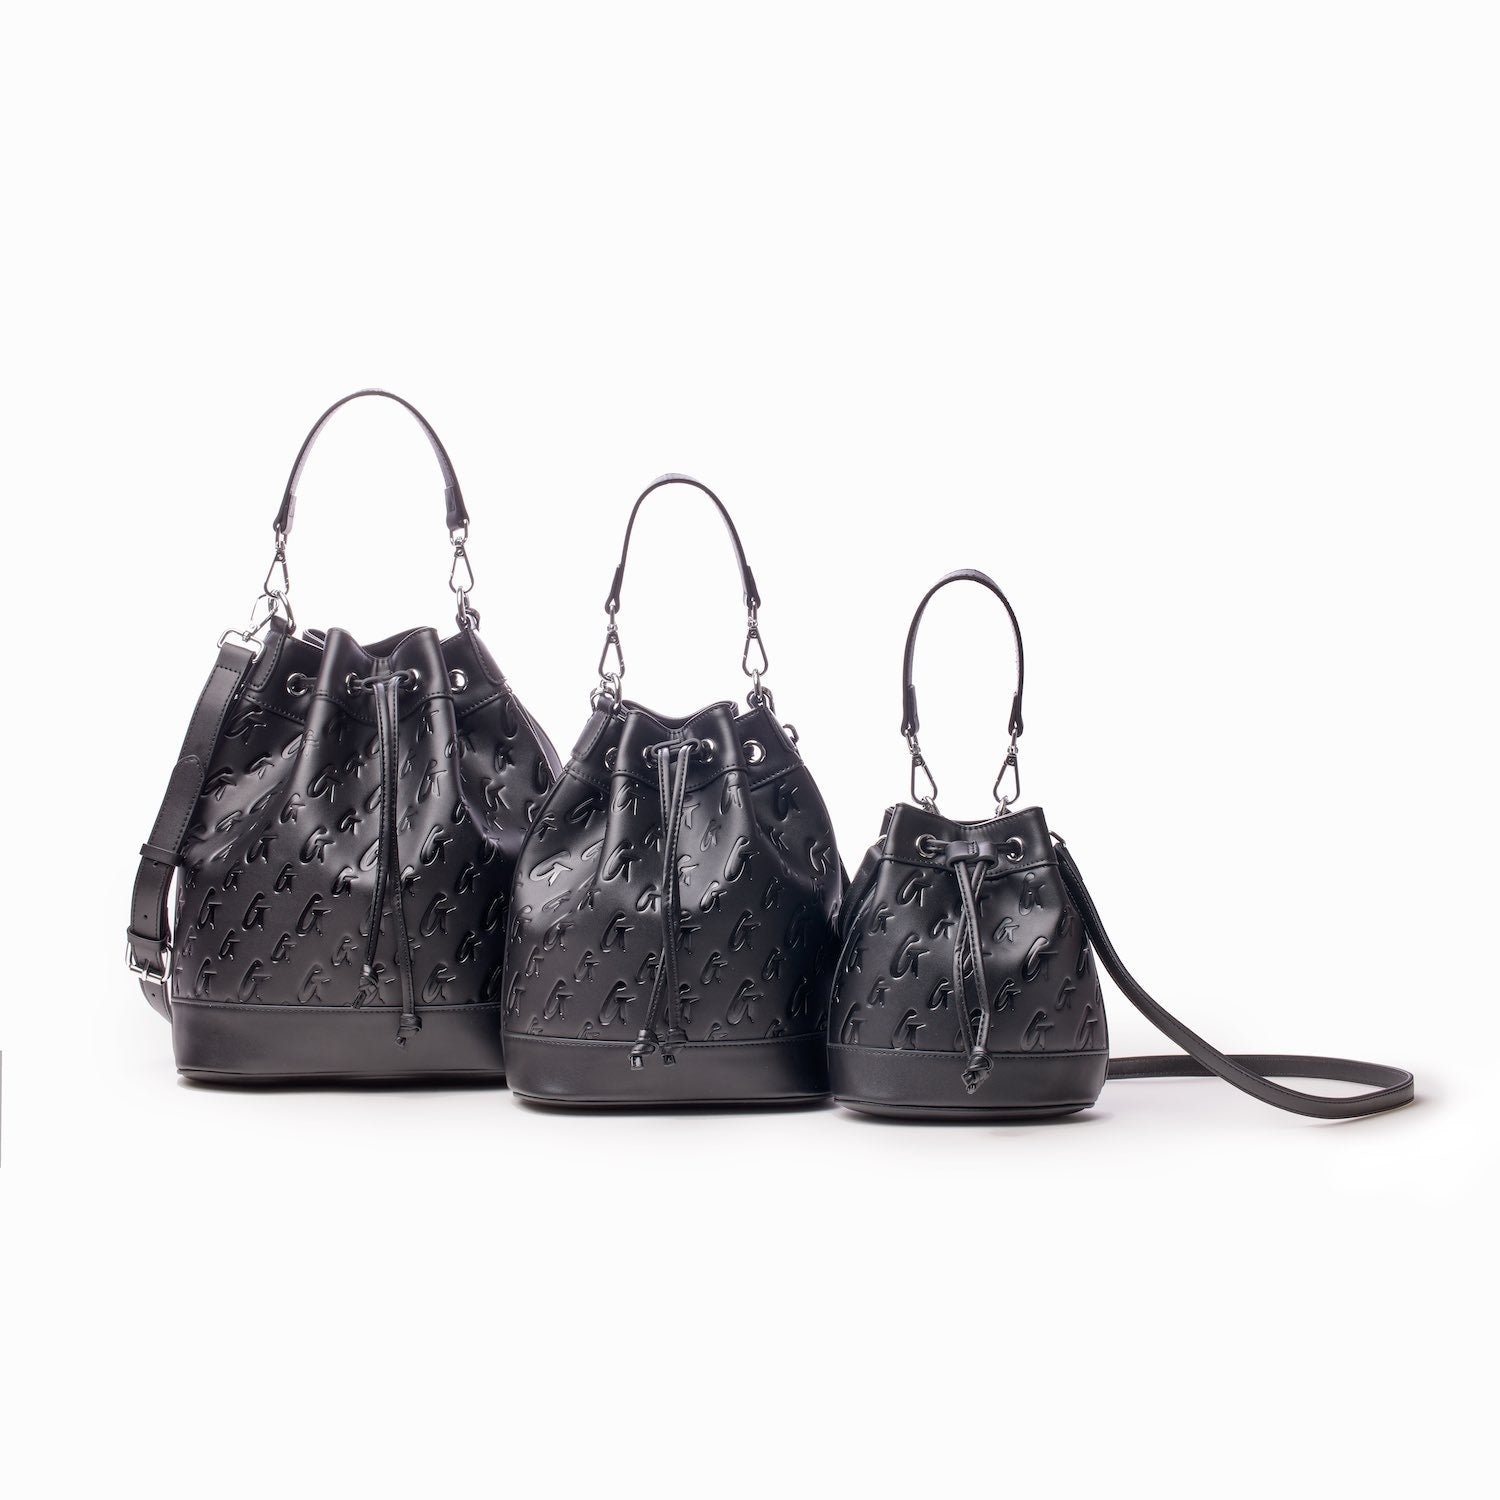 MATTE BLACK BUCKET BAGS UNBOXING FROM GLAM-AHOLIC LIFESTYLE BY MIA